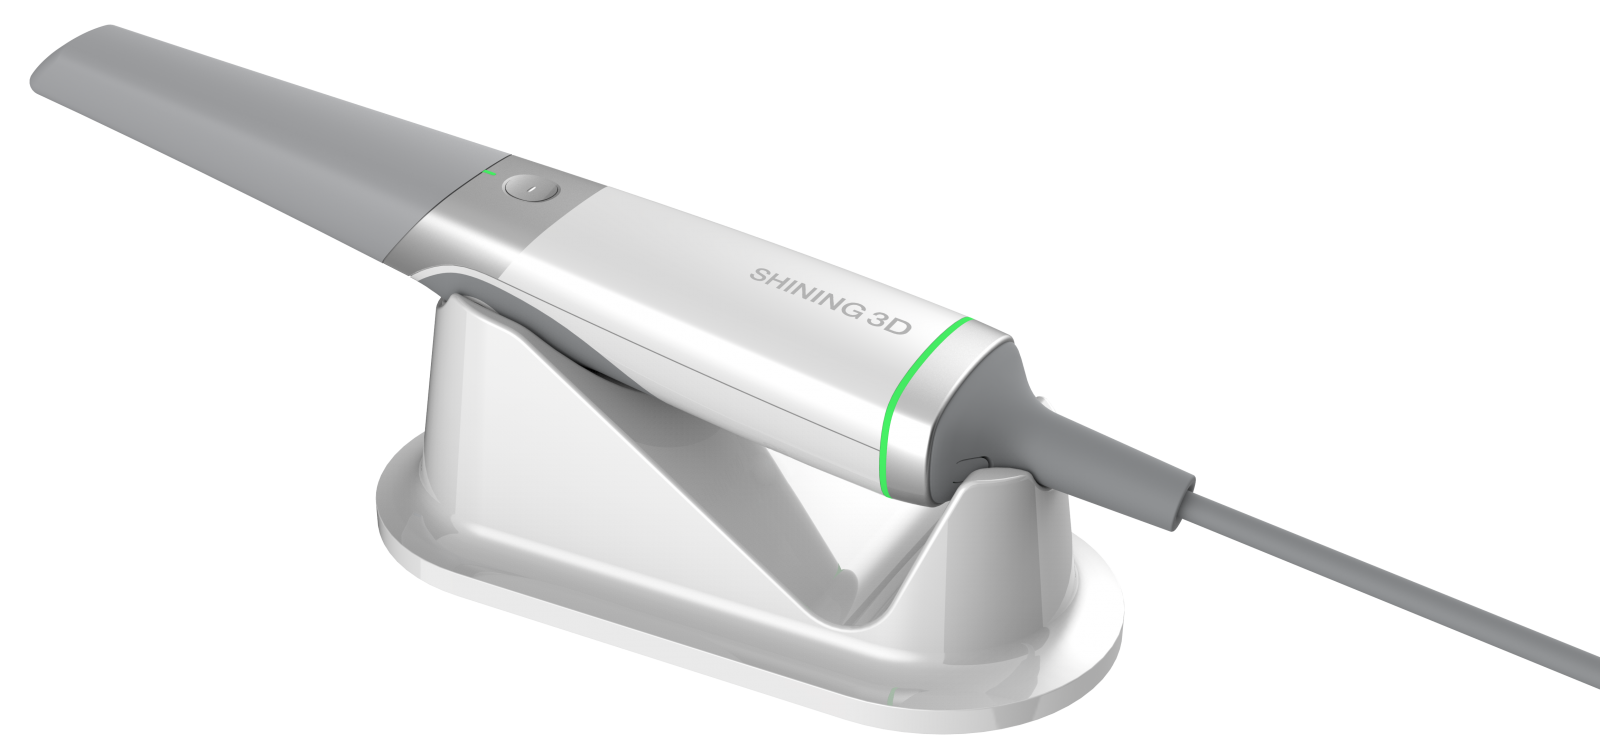 Handheld intraoral scanner by Shining 3D